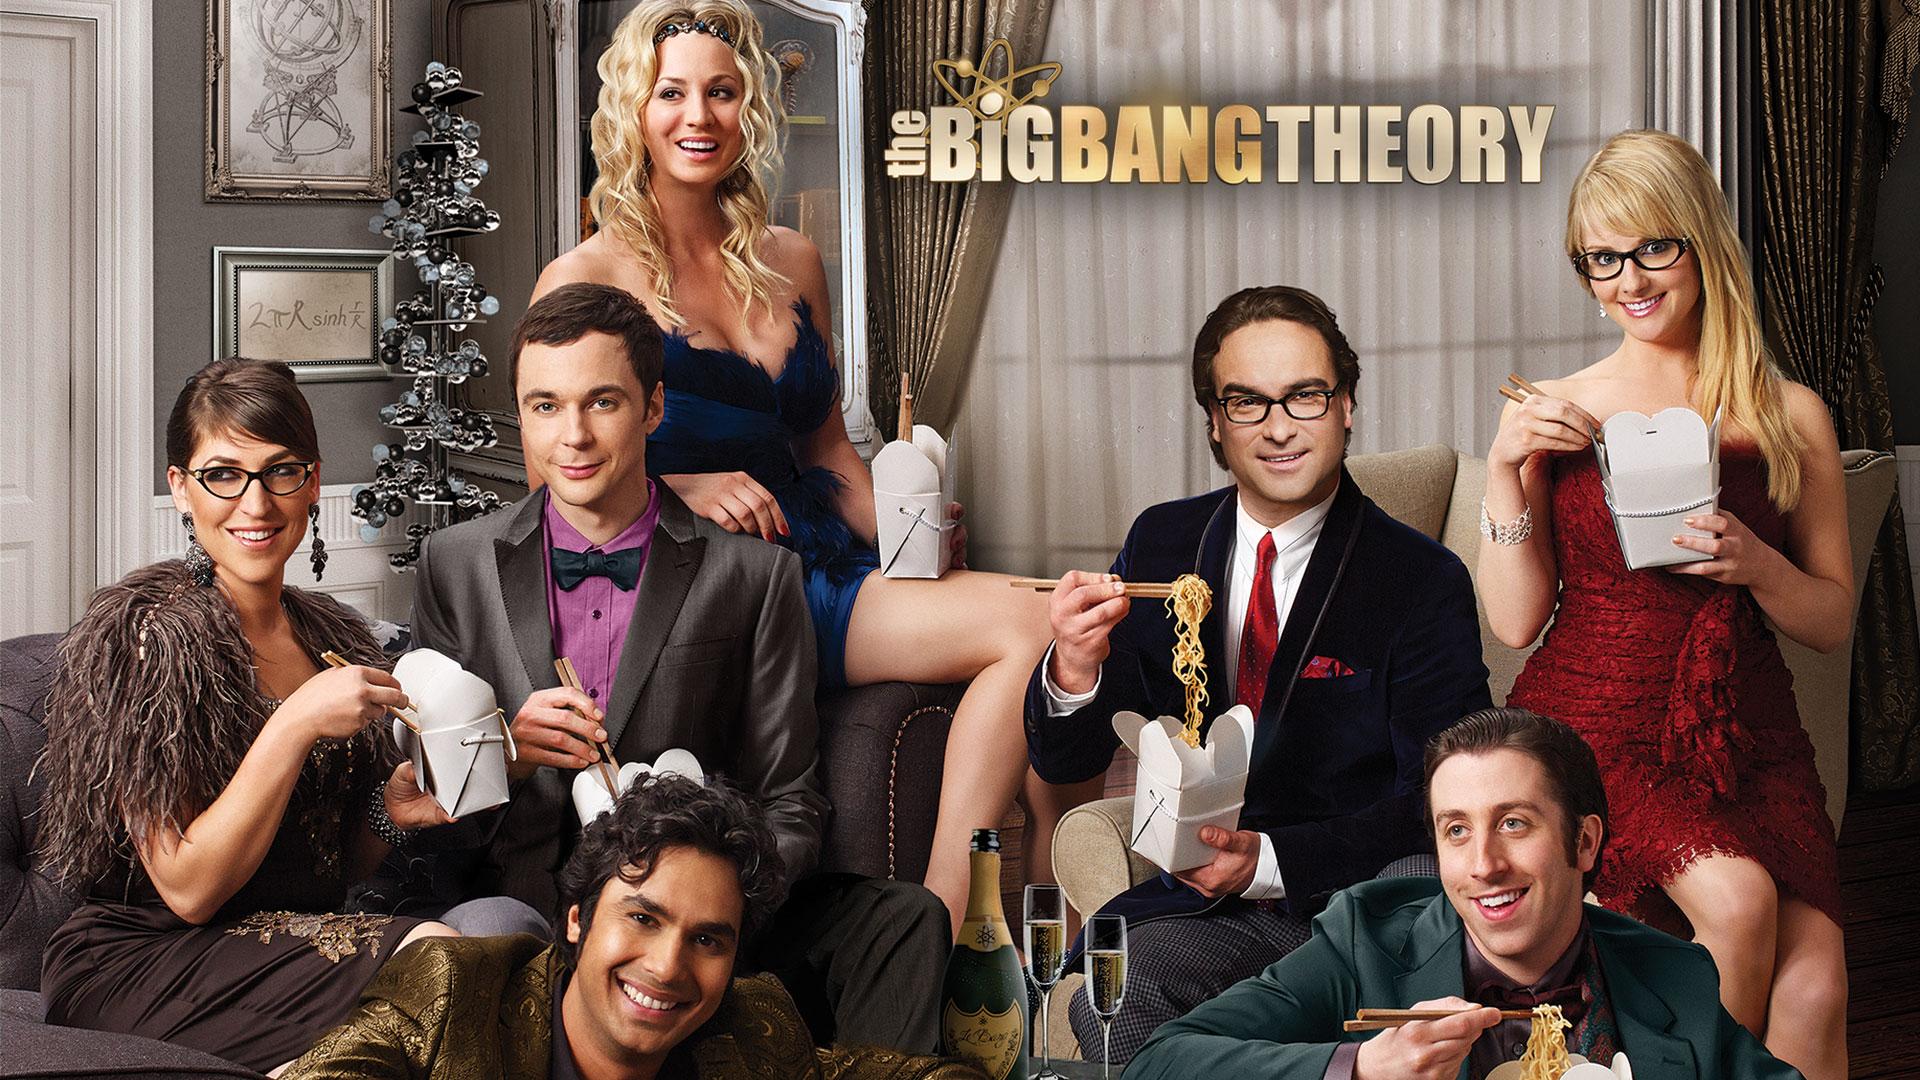 The Big Bang Theory Wallpaper, Picture, Image